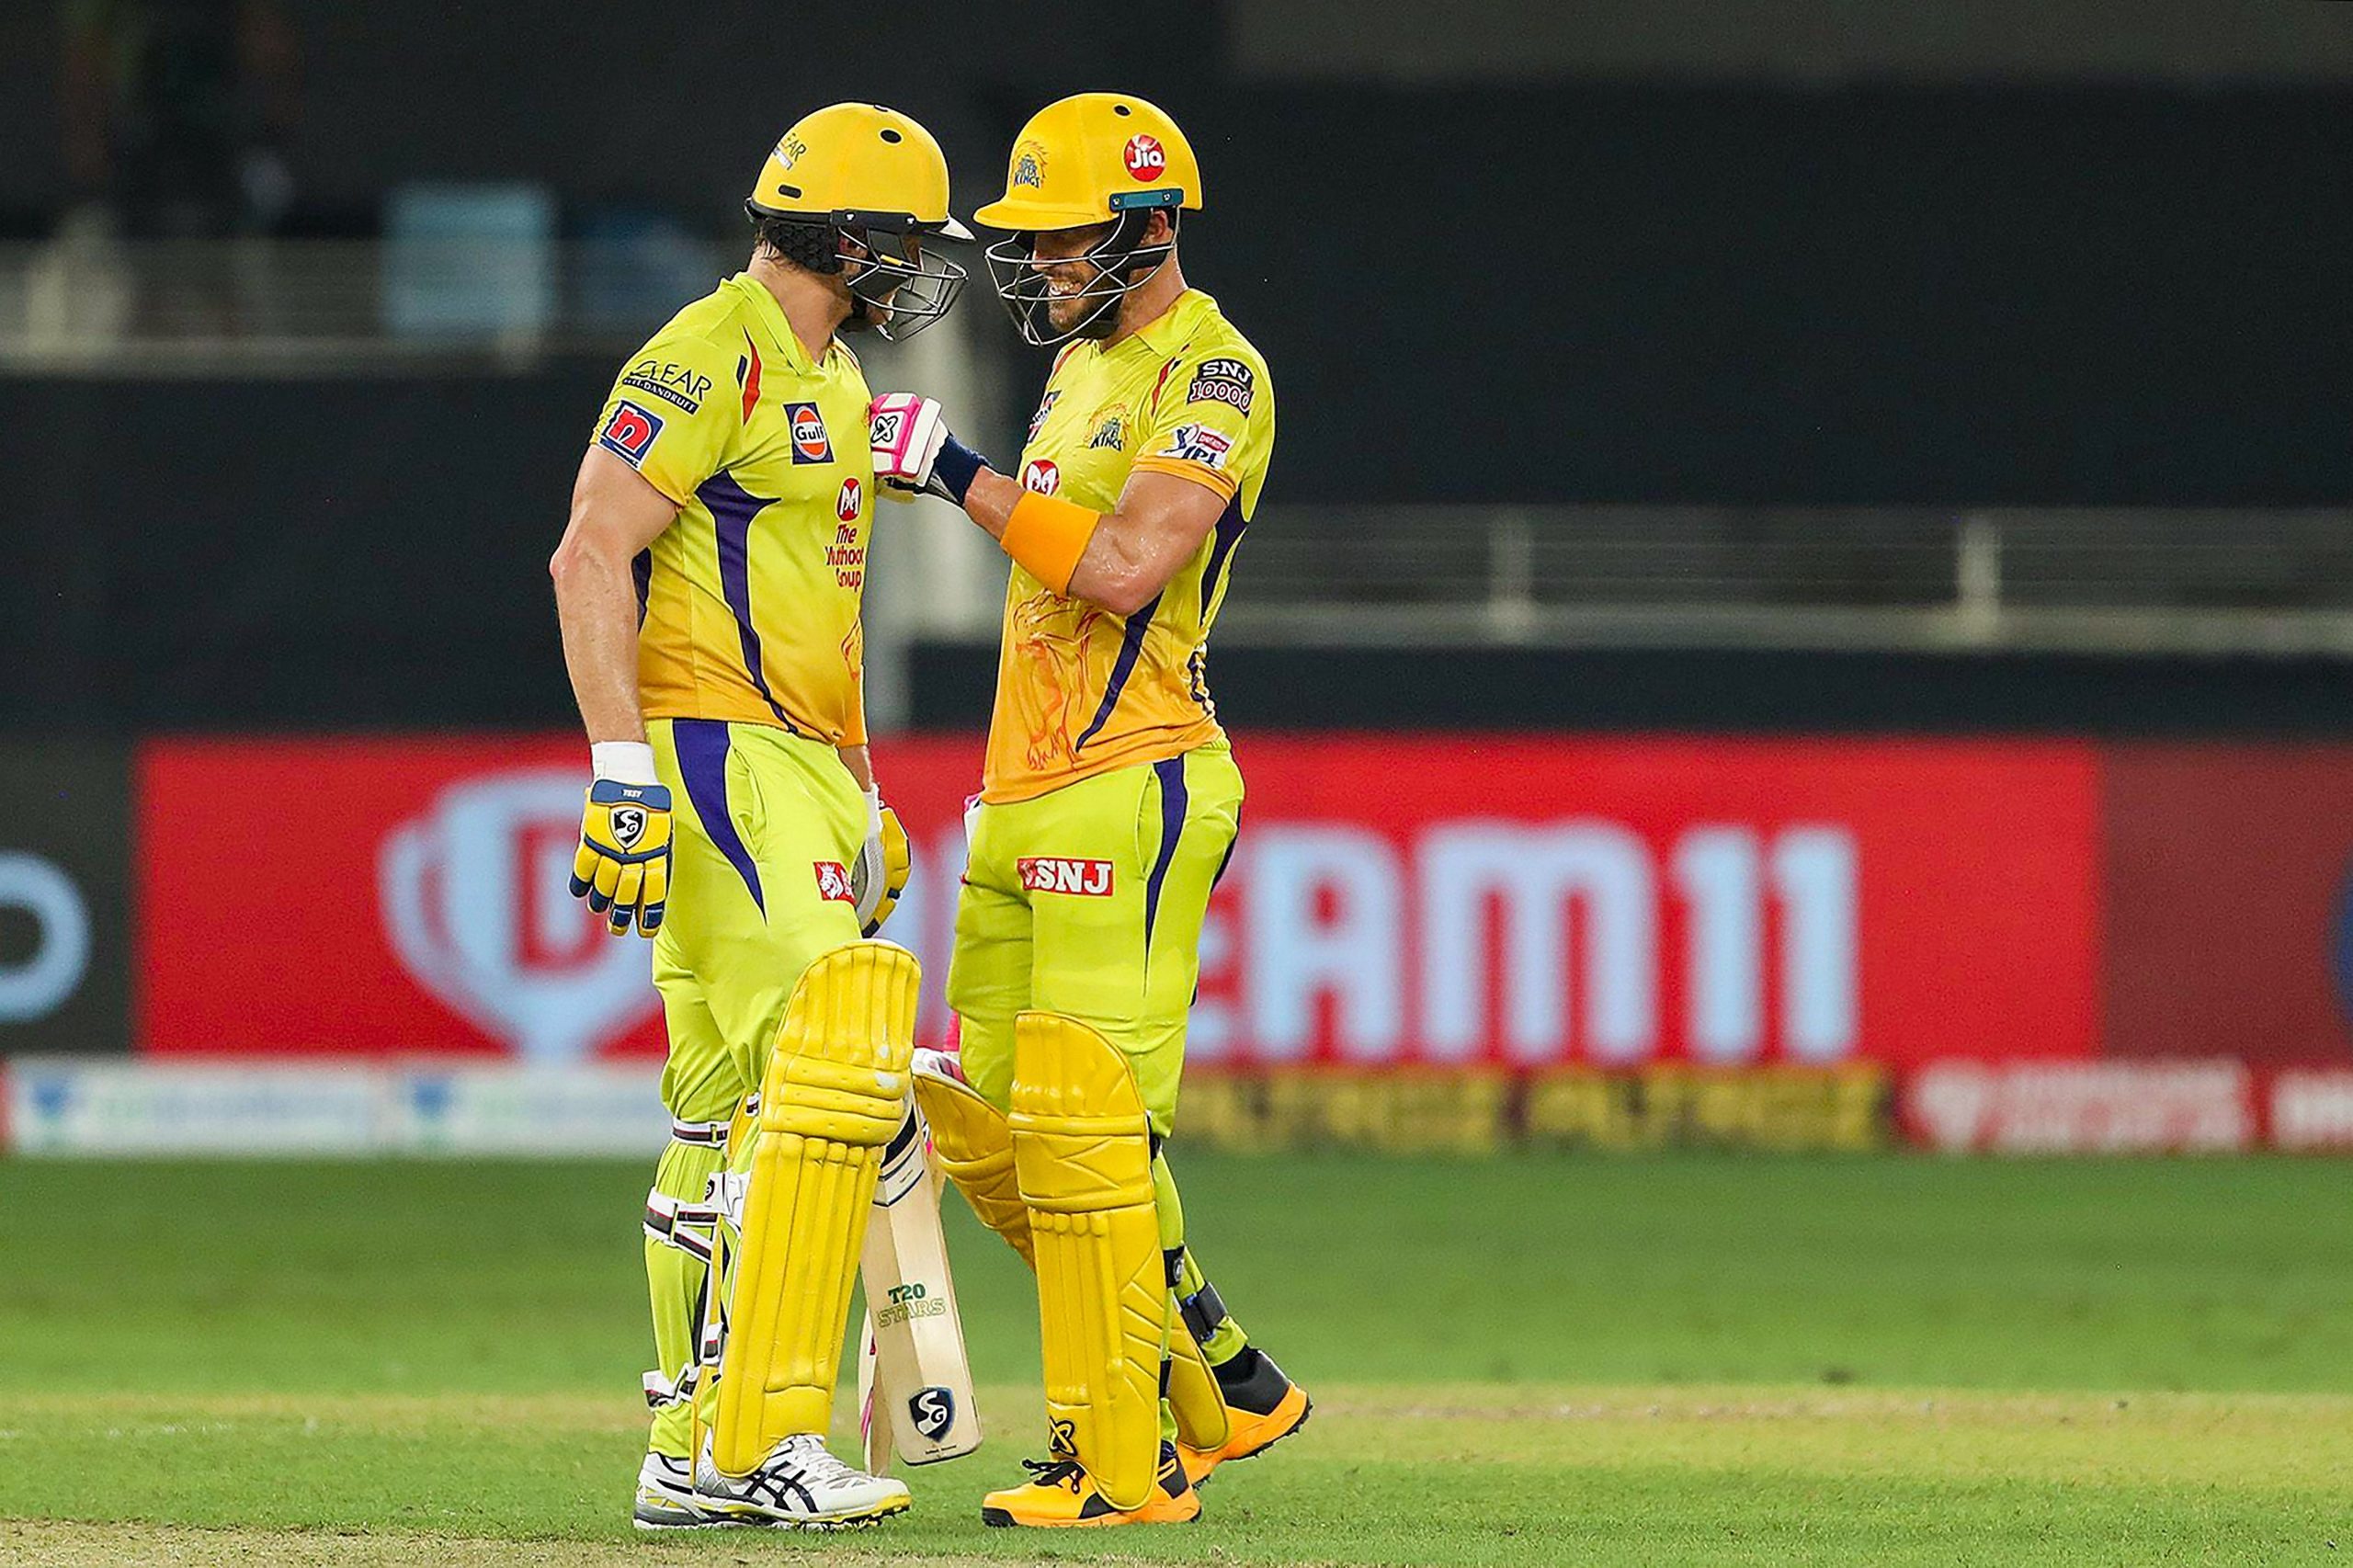 ‘Kings have arrived’: Twitter lauds Chennai Super Kings’ win over Kings XI Punjab